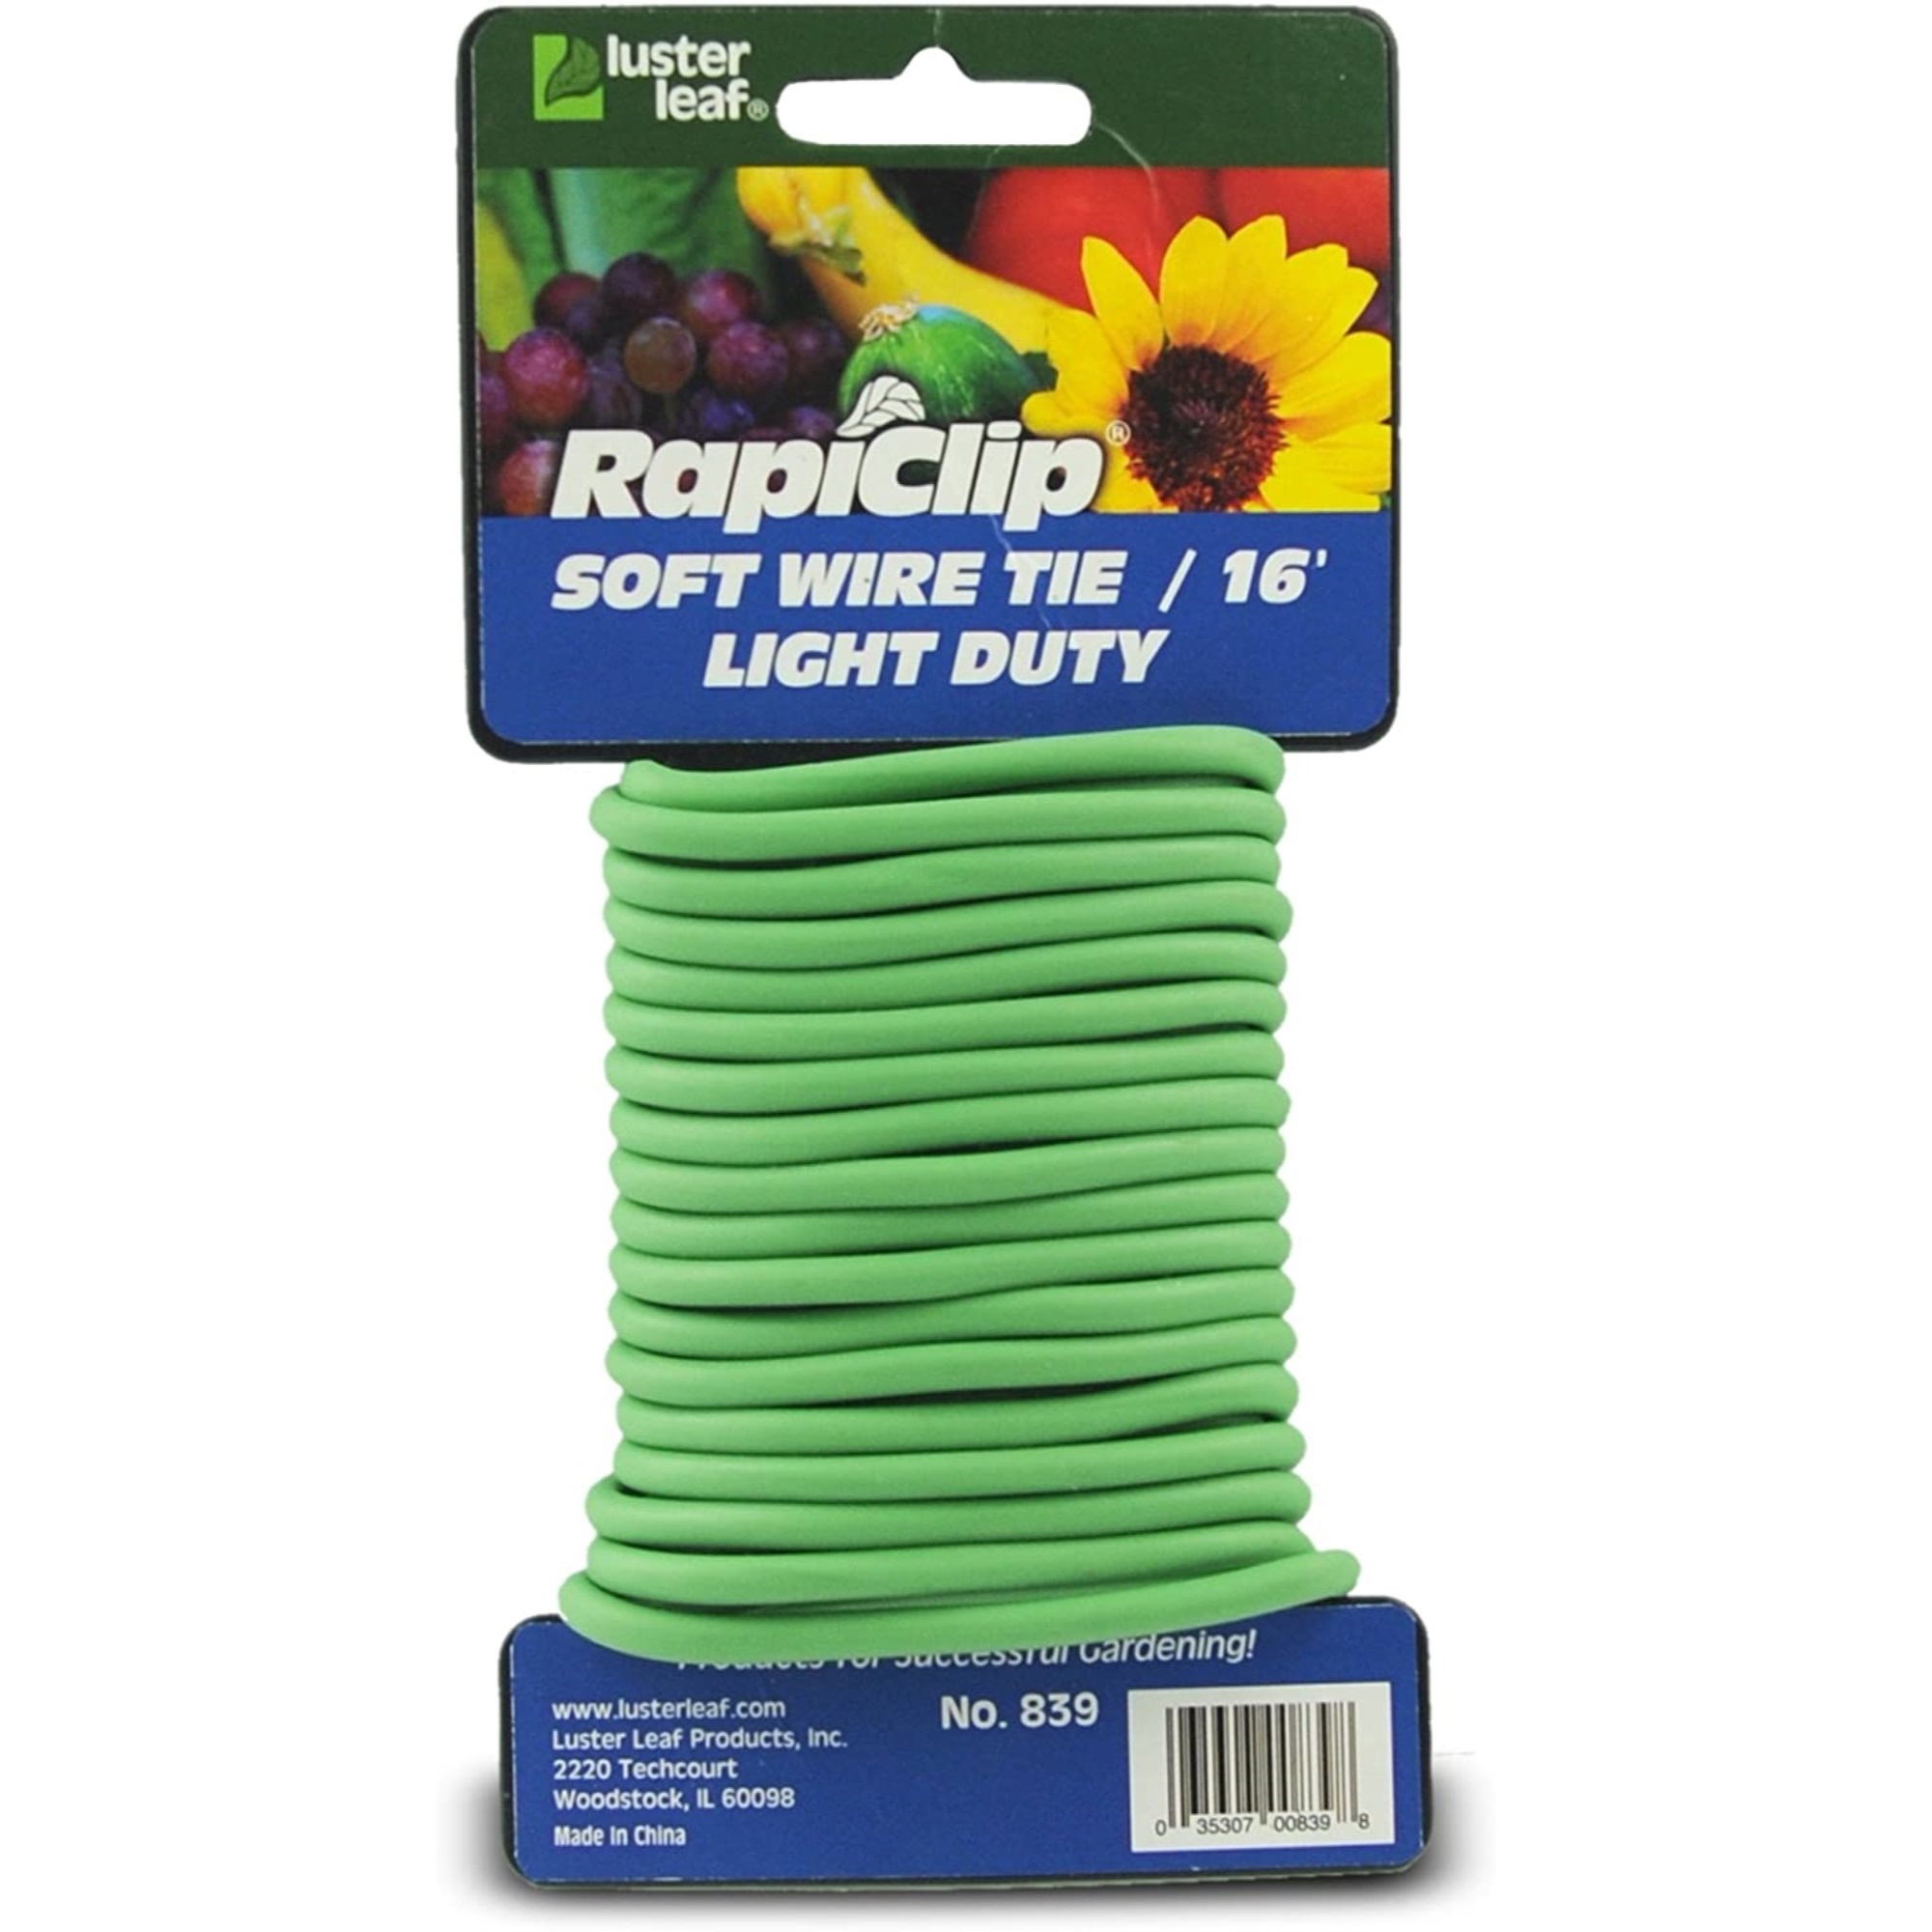 Luster Leaf 856 Rapiclip Vinyl Stretch Plant Wire Tie, Green - image 1 of 3